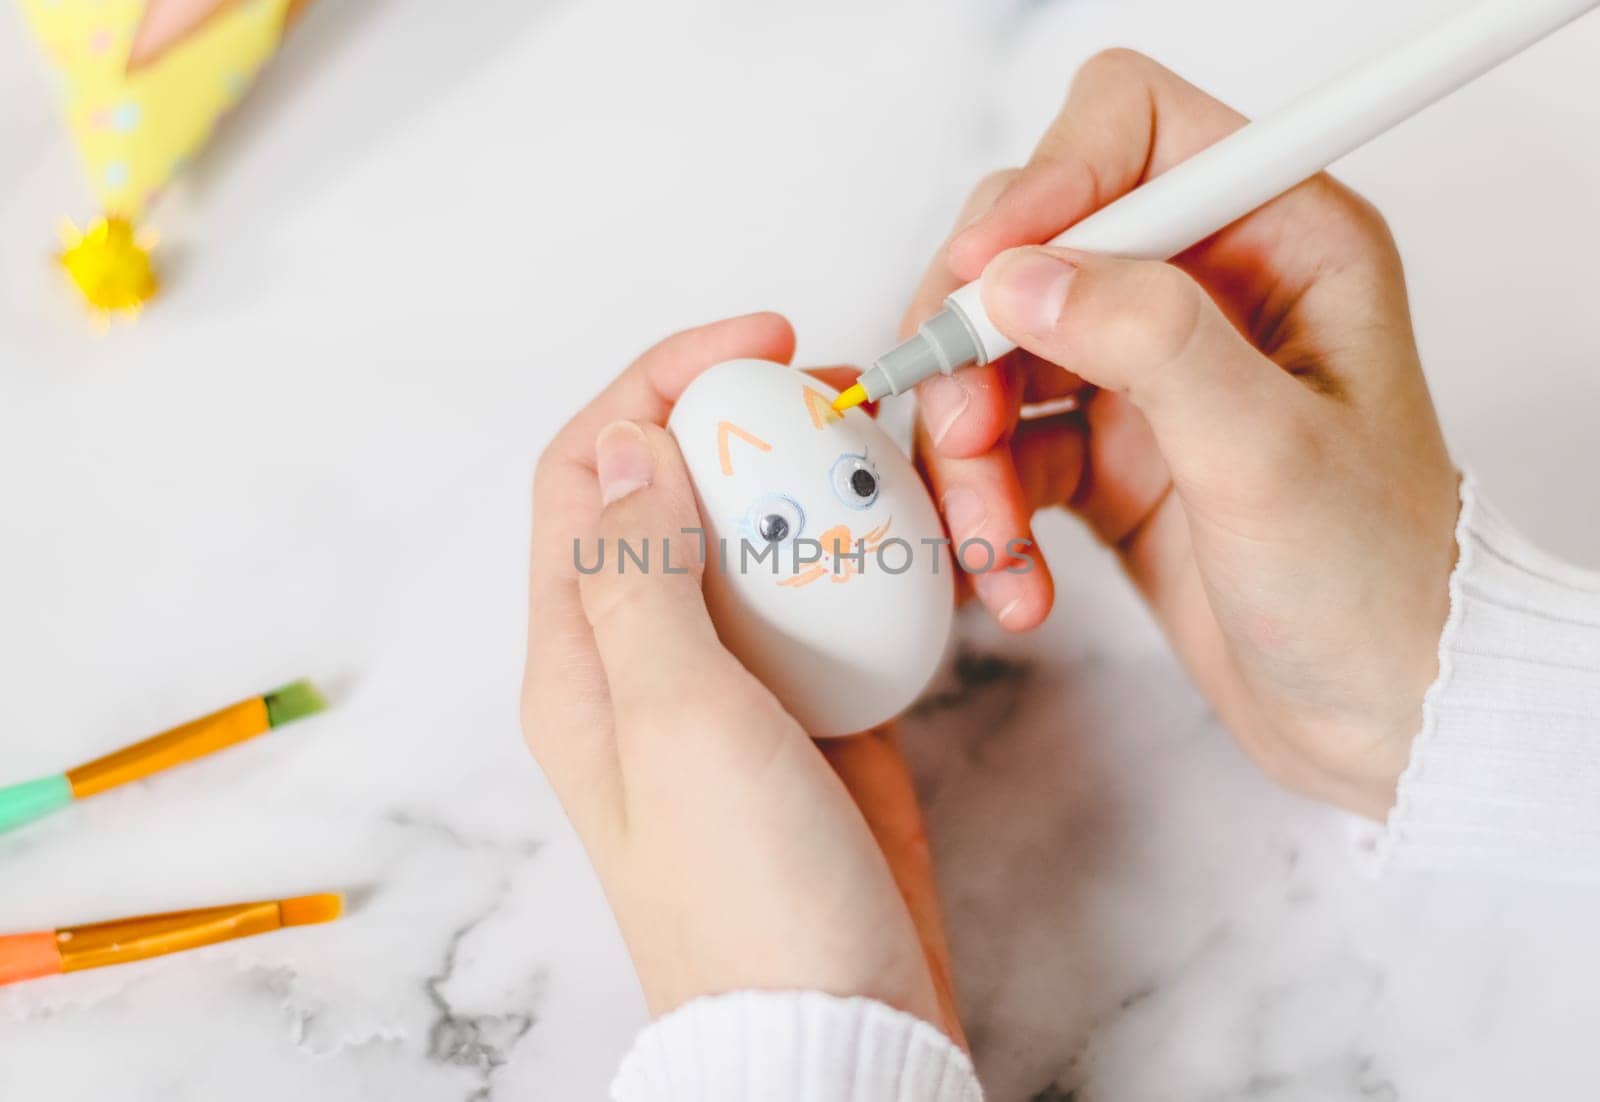 The hands of a caucasian girl in a white turtleneck draw with an orange marker on an egg the ears of an easter bunny on a marble table to prepare for the easter holiday, close-up flat lay. The concept of craft, needlework, at home, artisanal, children creative, easter preparation, children creative.